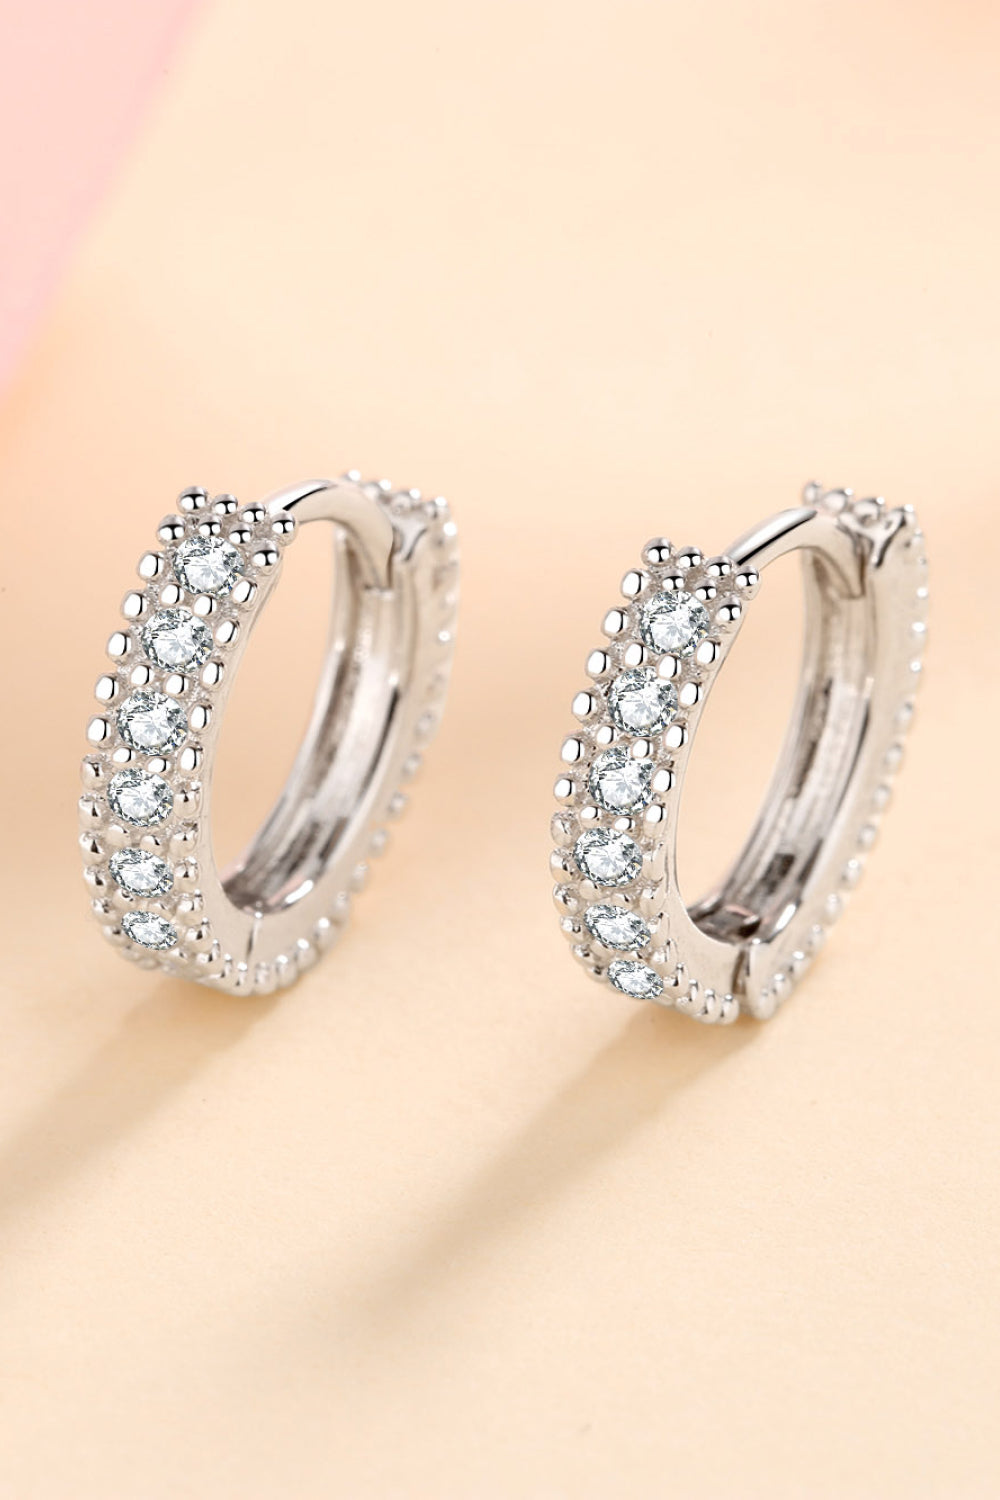 Women’s Jewelry Sterling Silver with Inlaid Moissanite Diamonds Huggie Earrings